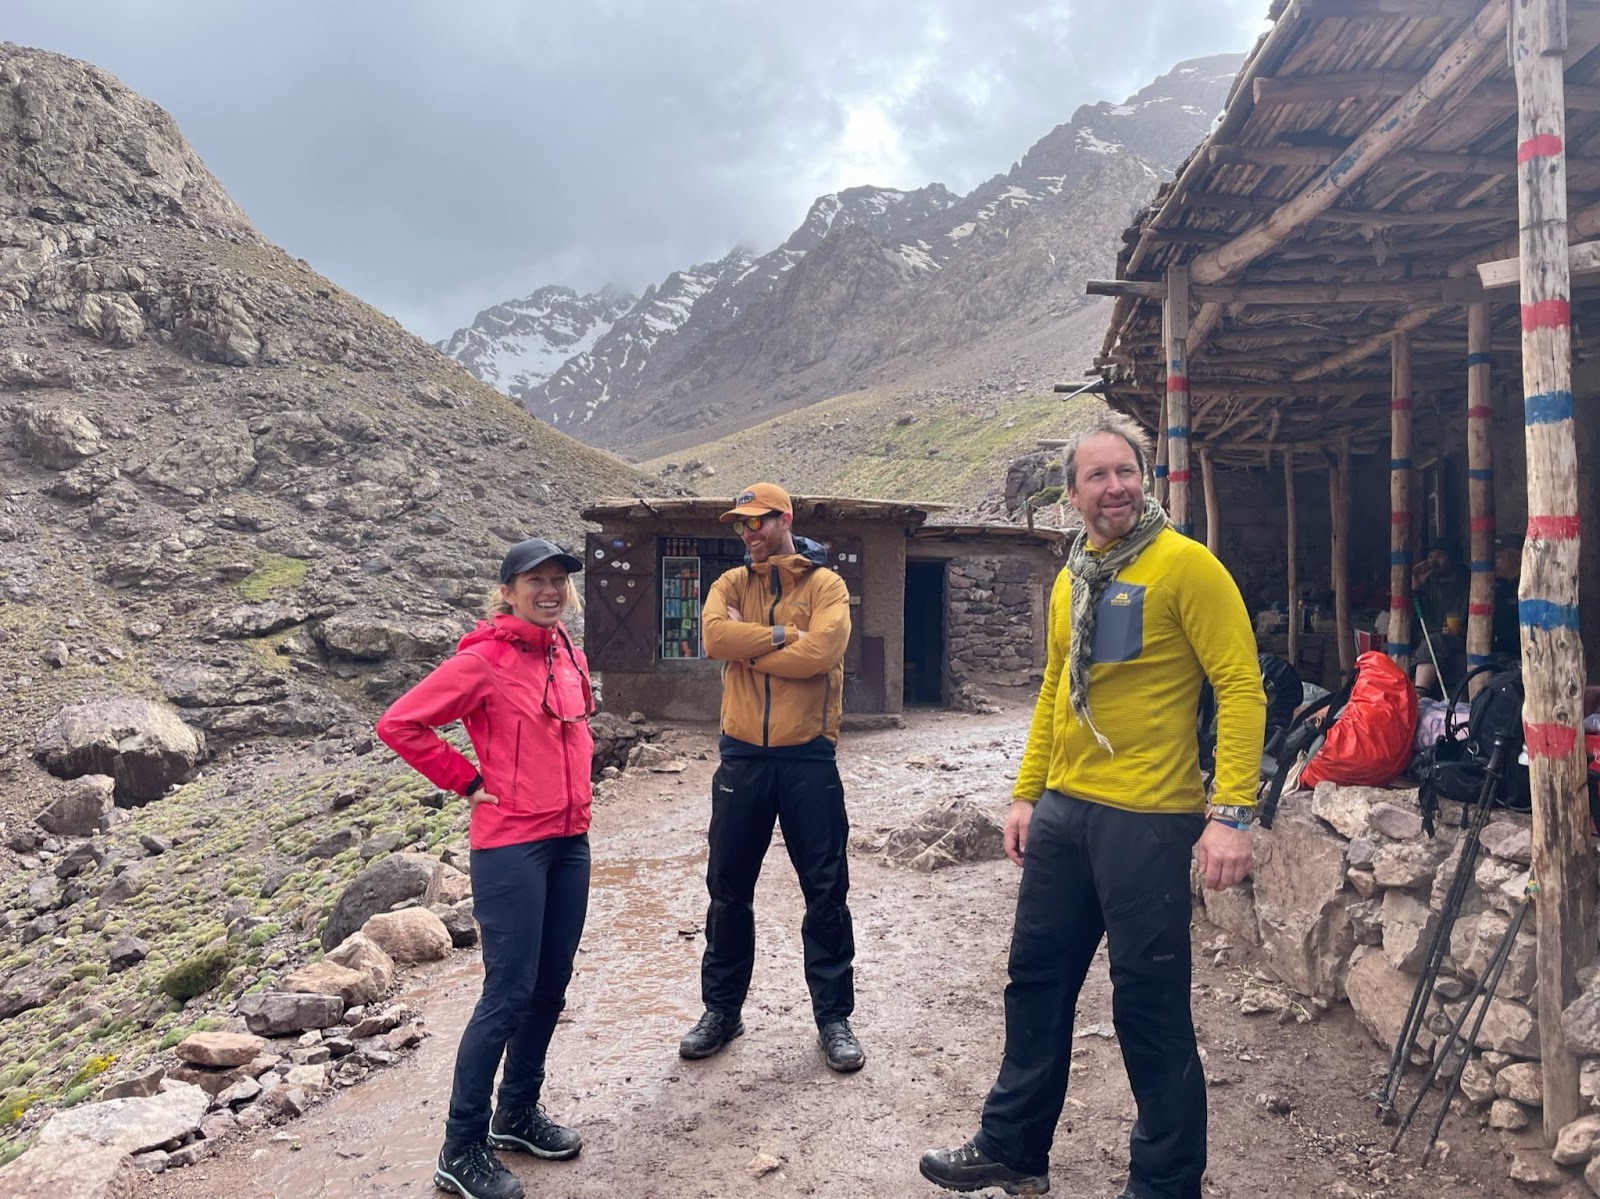 Emer and two fellow hikers resting in wet weather at a tea house on the way up Mount Toubkal.